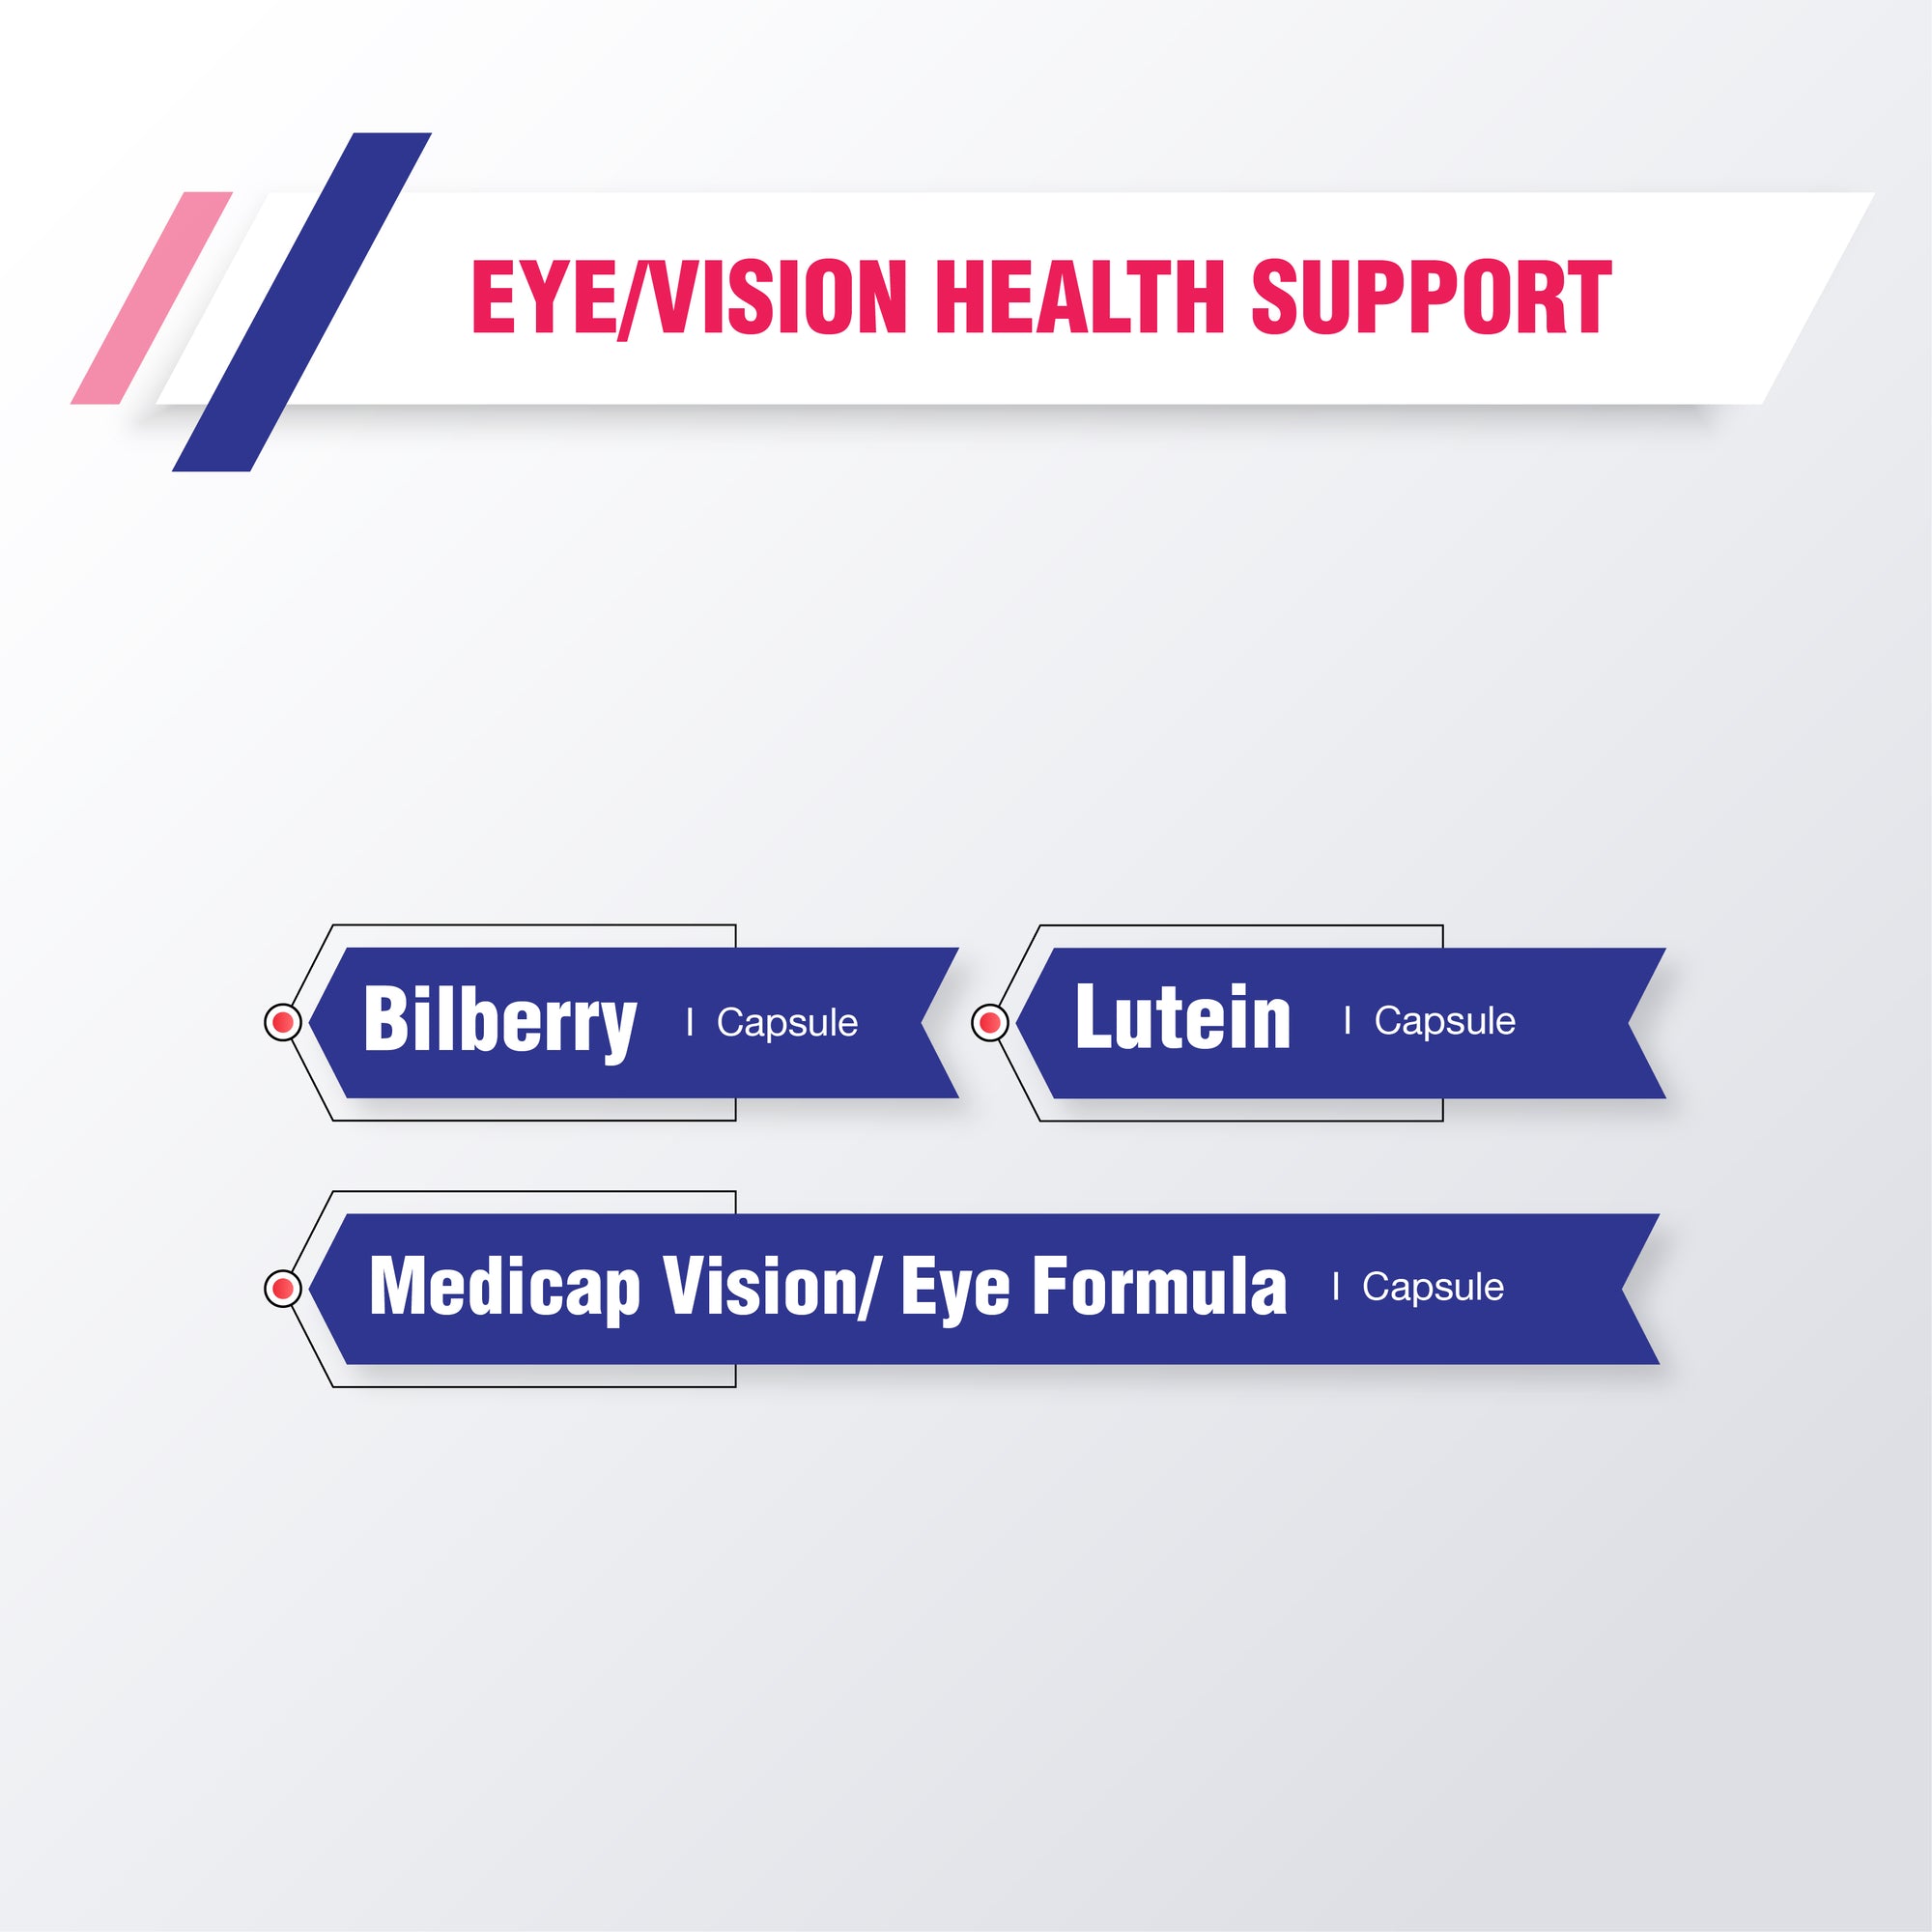 Eye / Vision Health Support